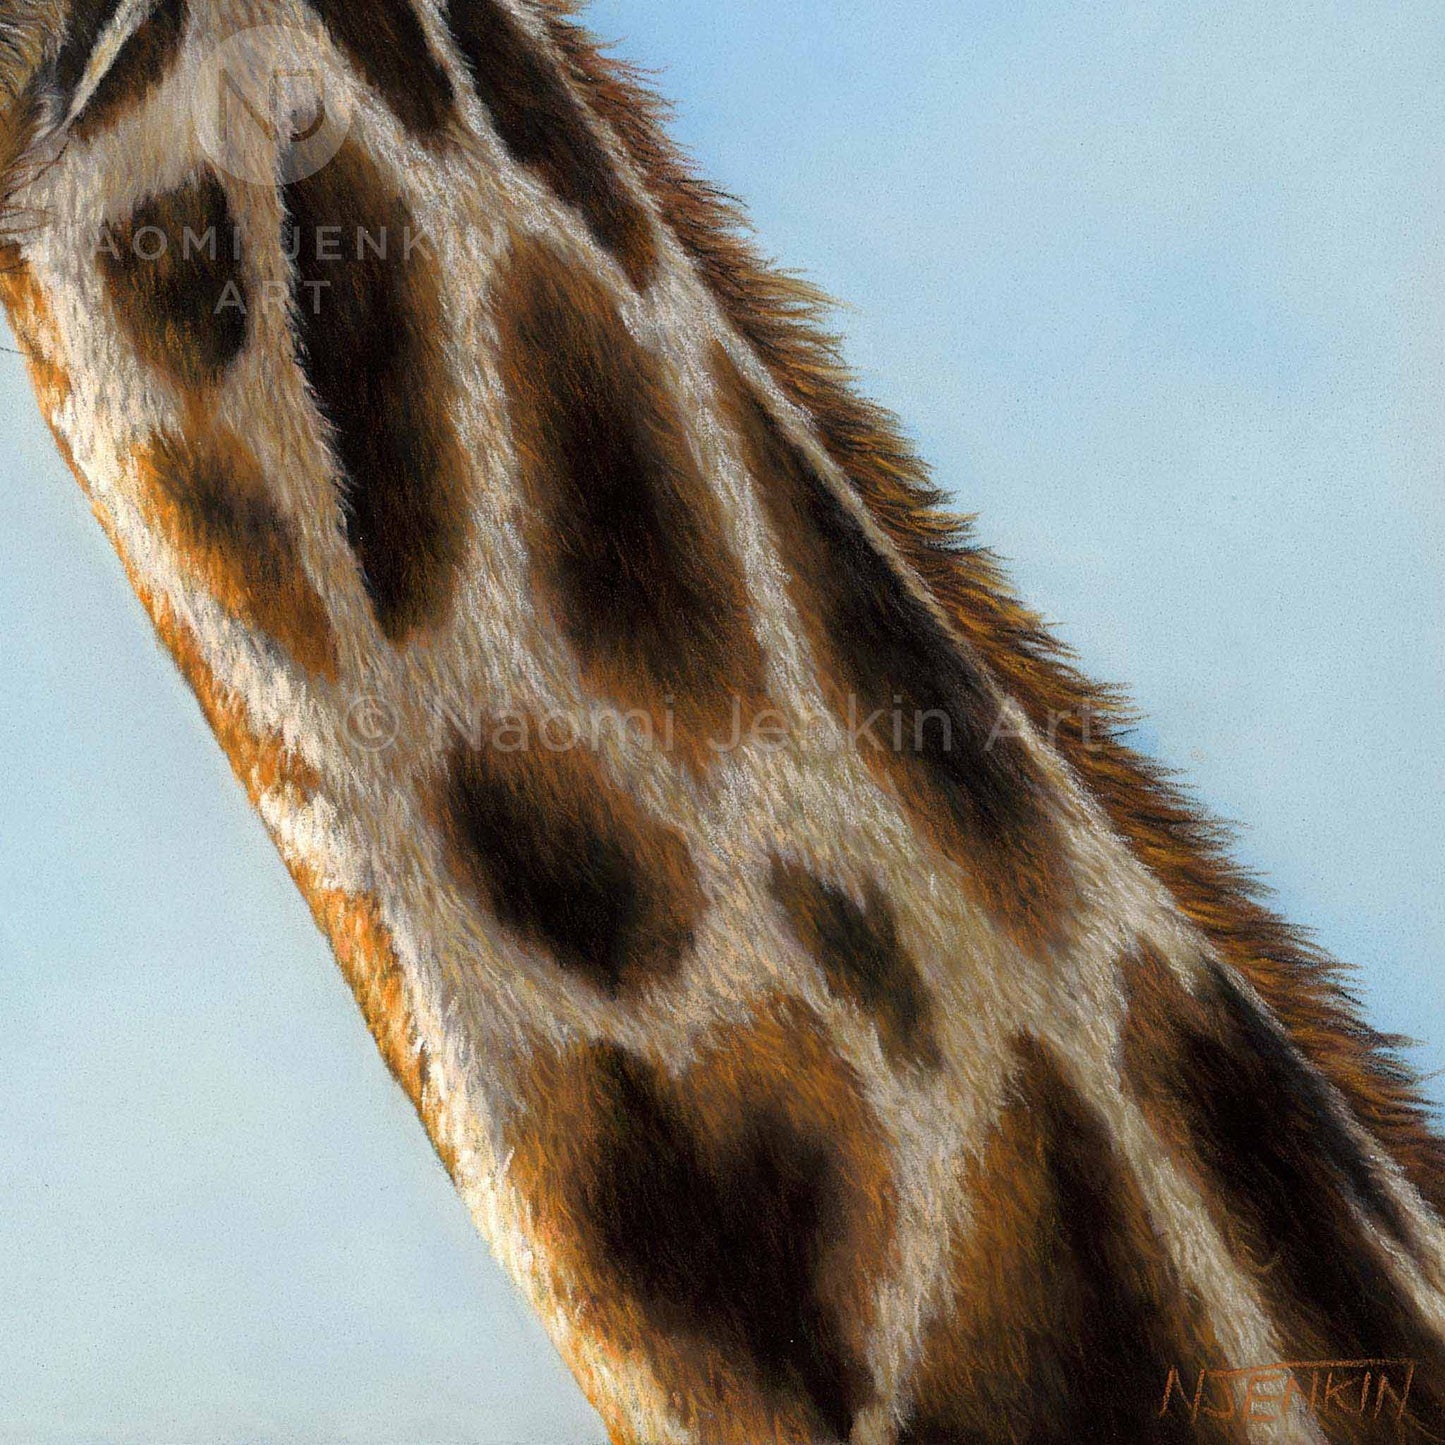 Detailed giraffe close up from the art print 'Neck and Neck' by wildlife artist Naomi Jenkin